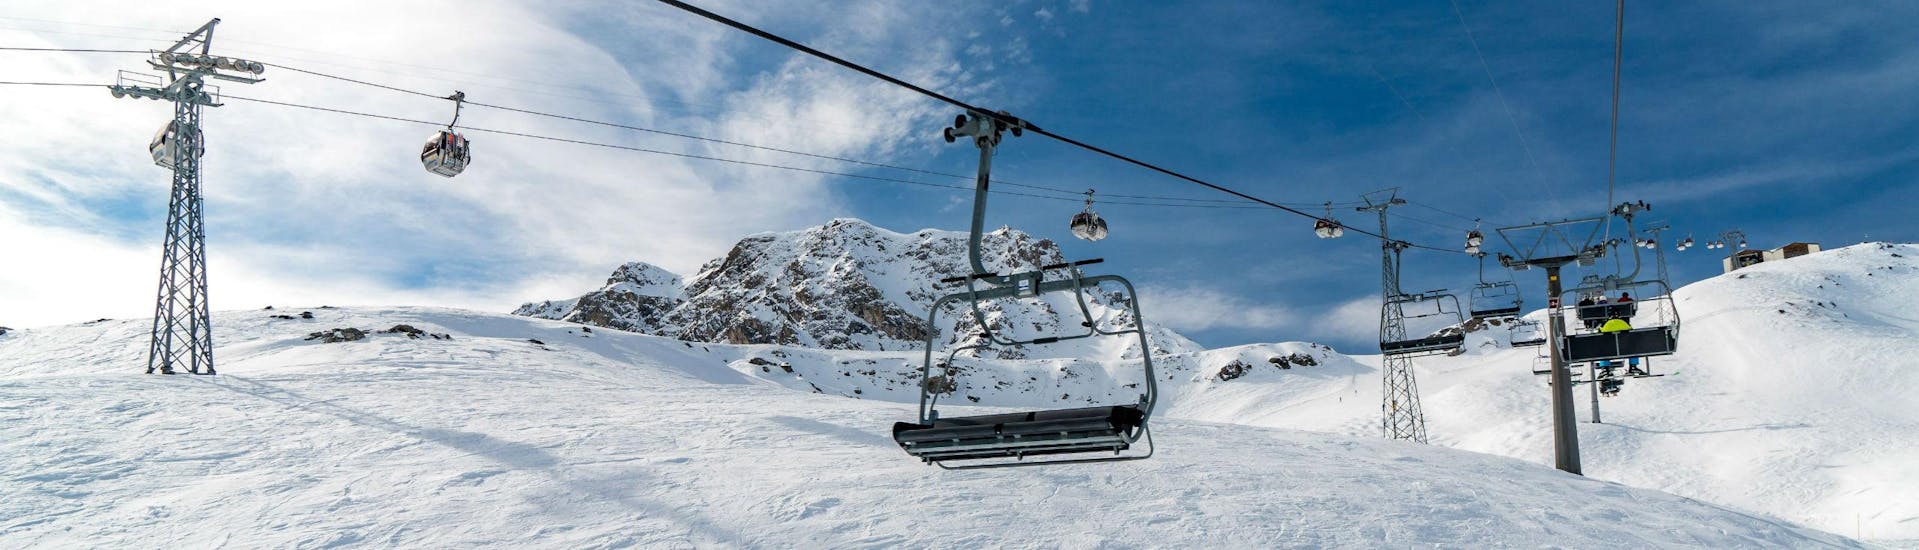 An image of a chair lift and a gondola in the Swiss ski resort of Arosa, where local ski schools offer ski lessons for all those who want to learn to ski.